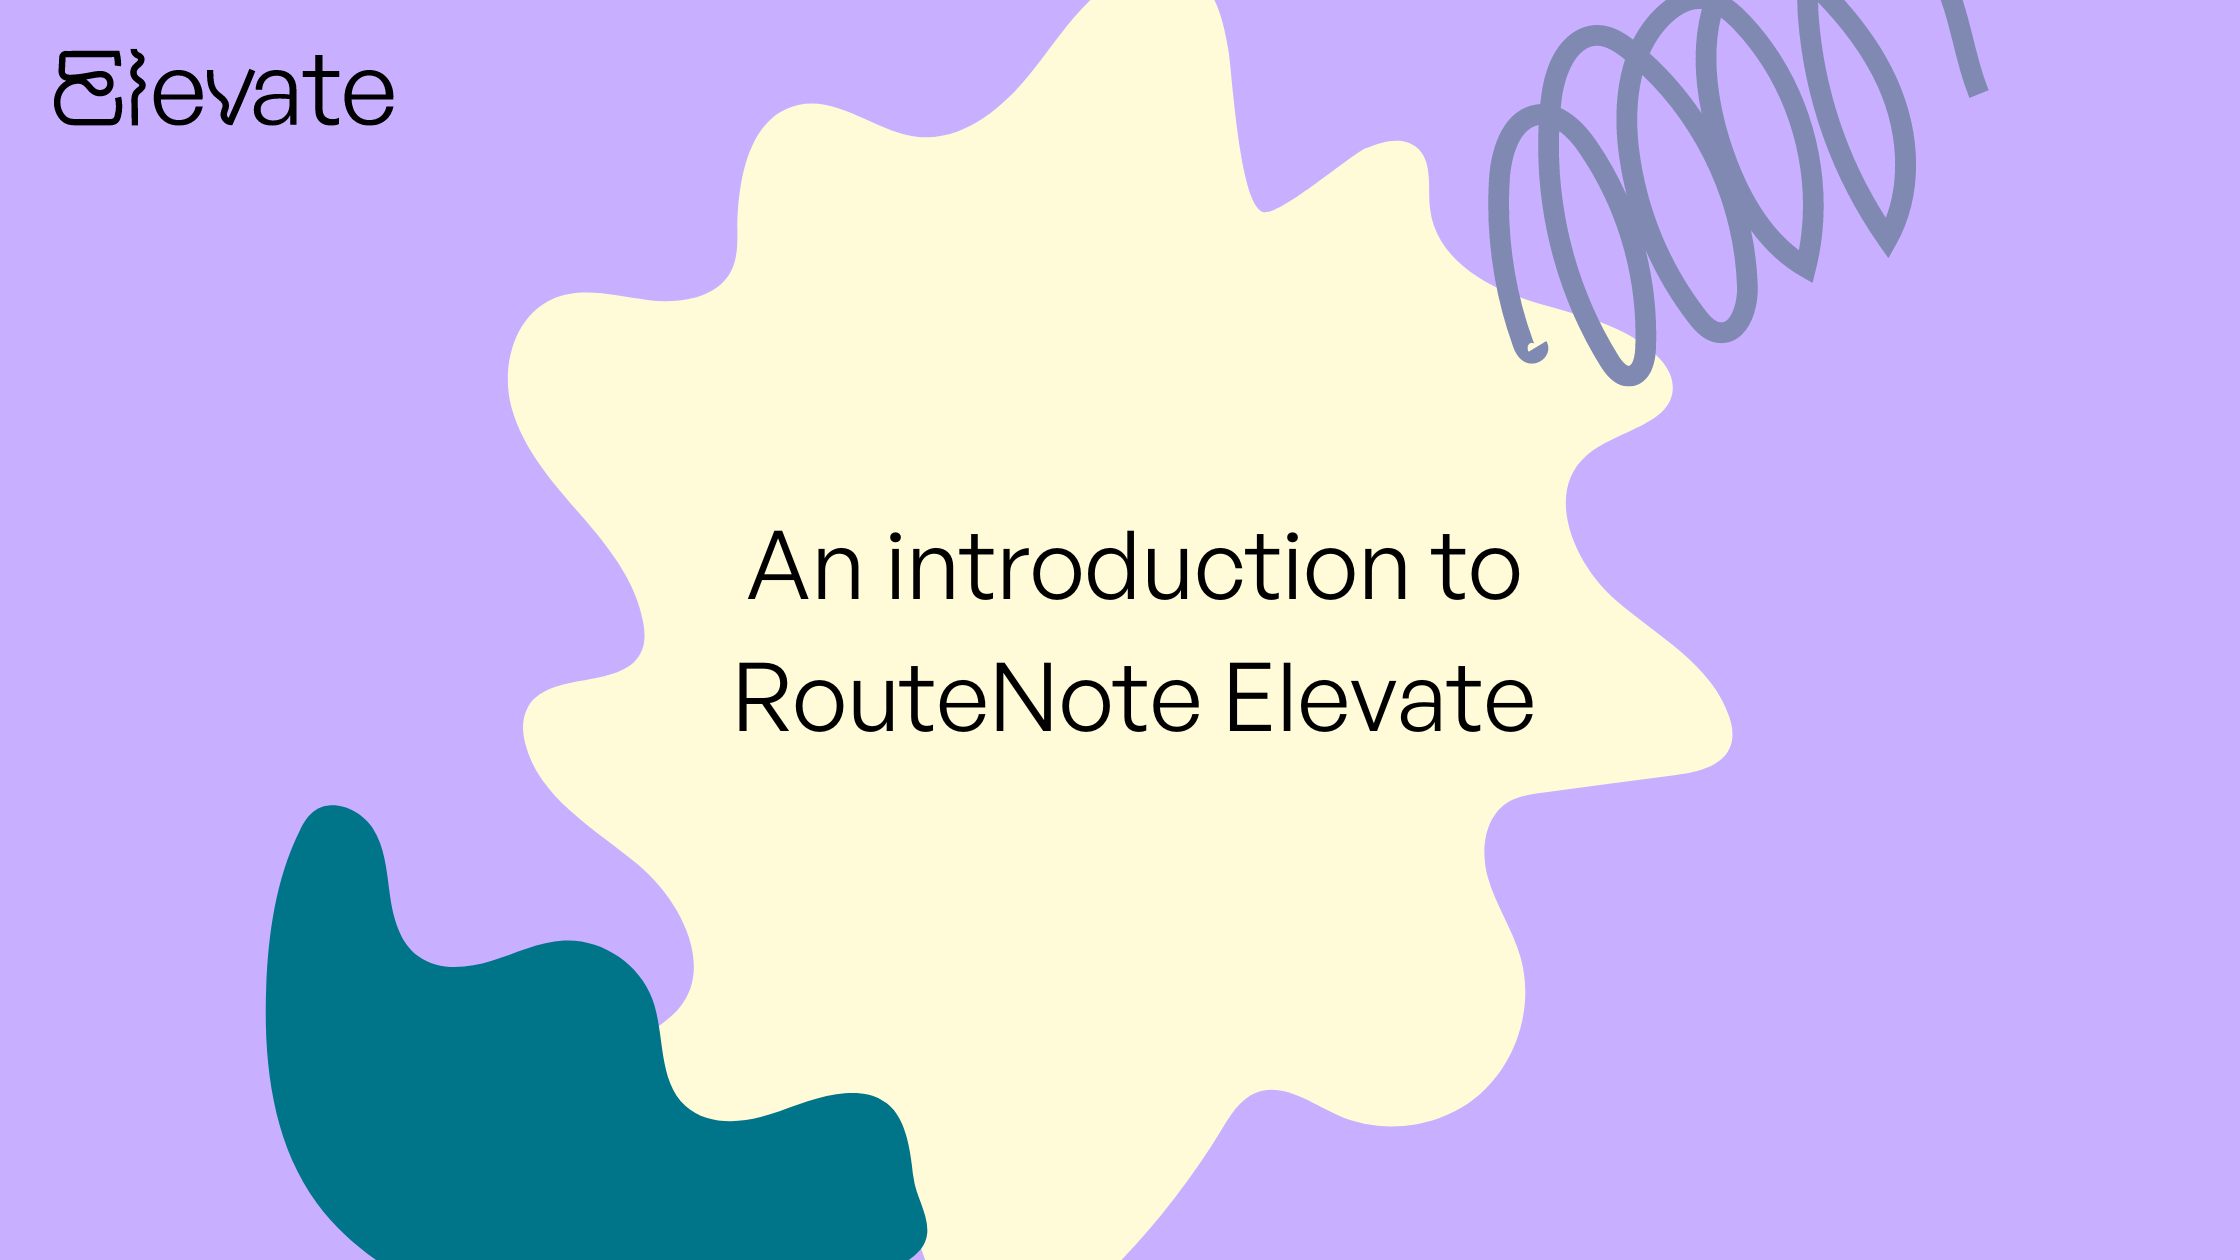 An introduction to RouteNote Elevate